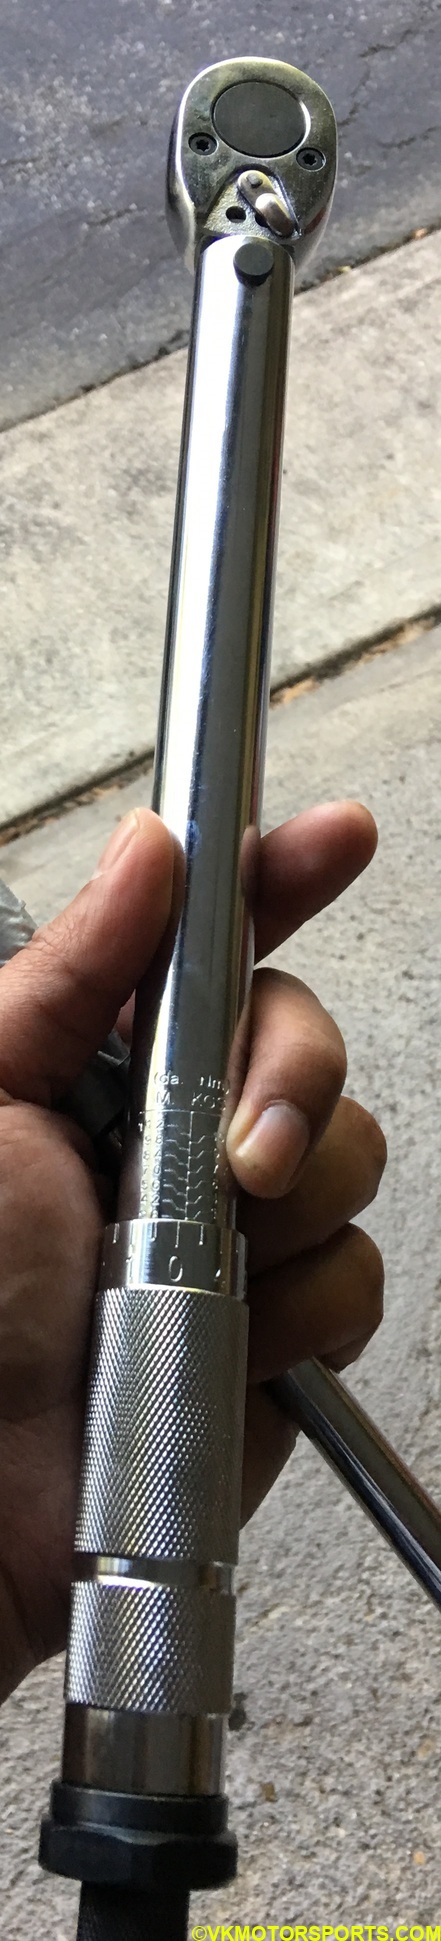 3/8" drive torque wrench